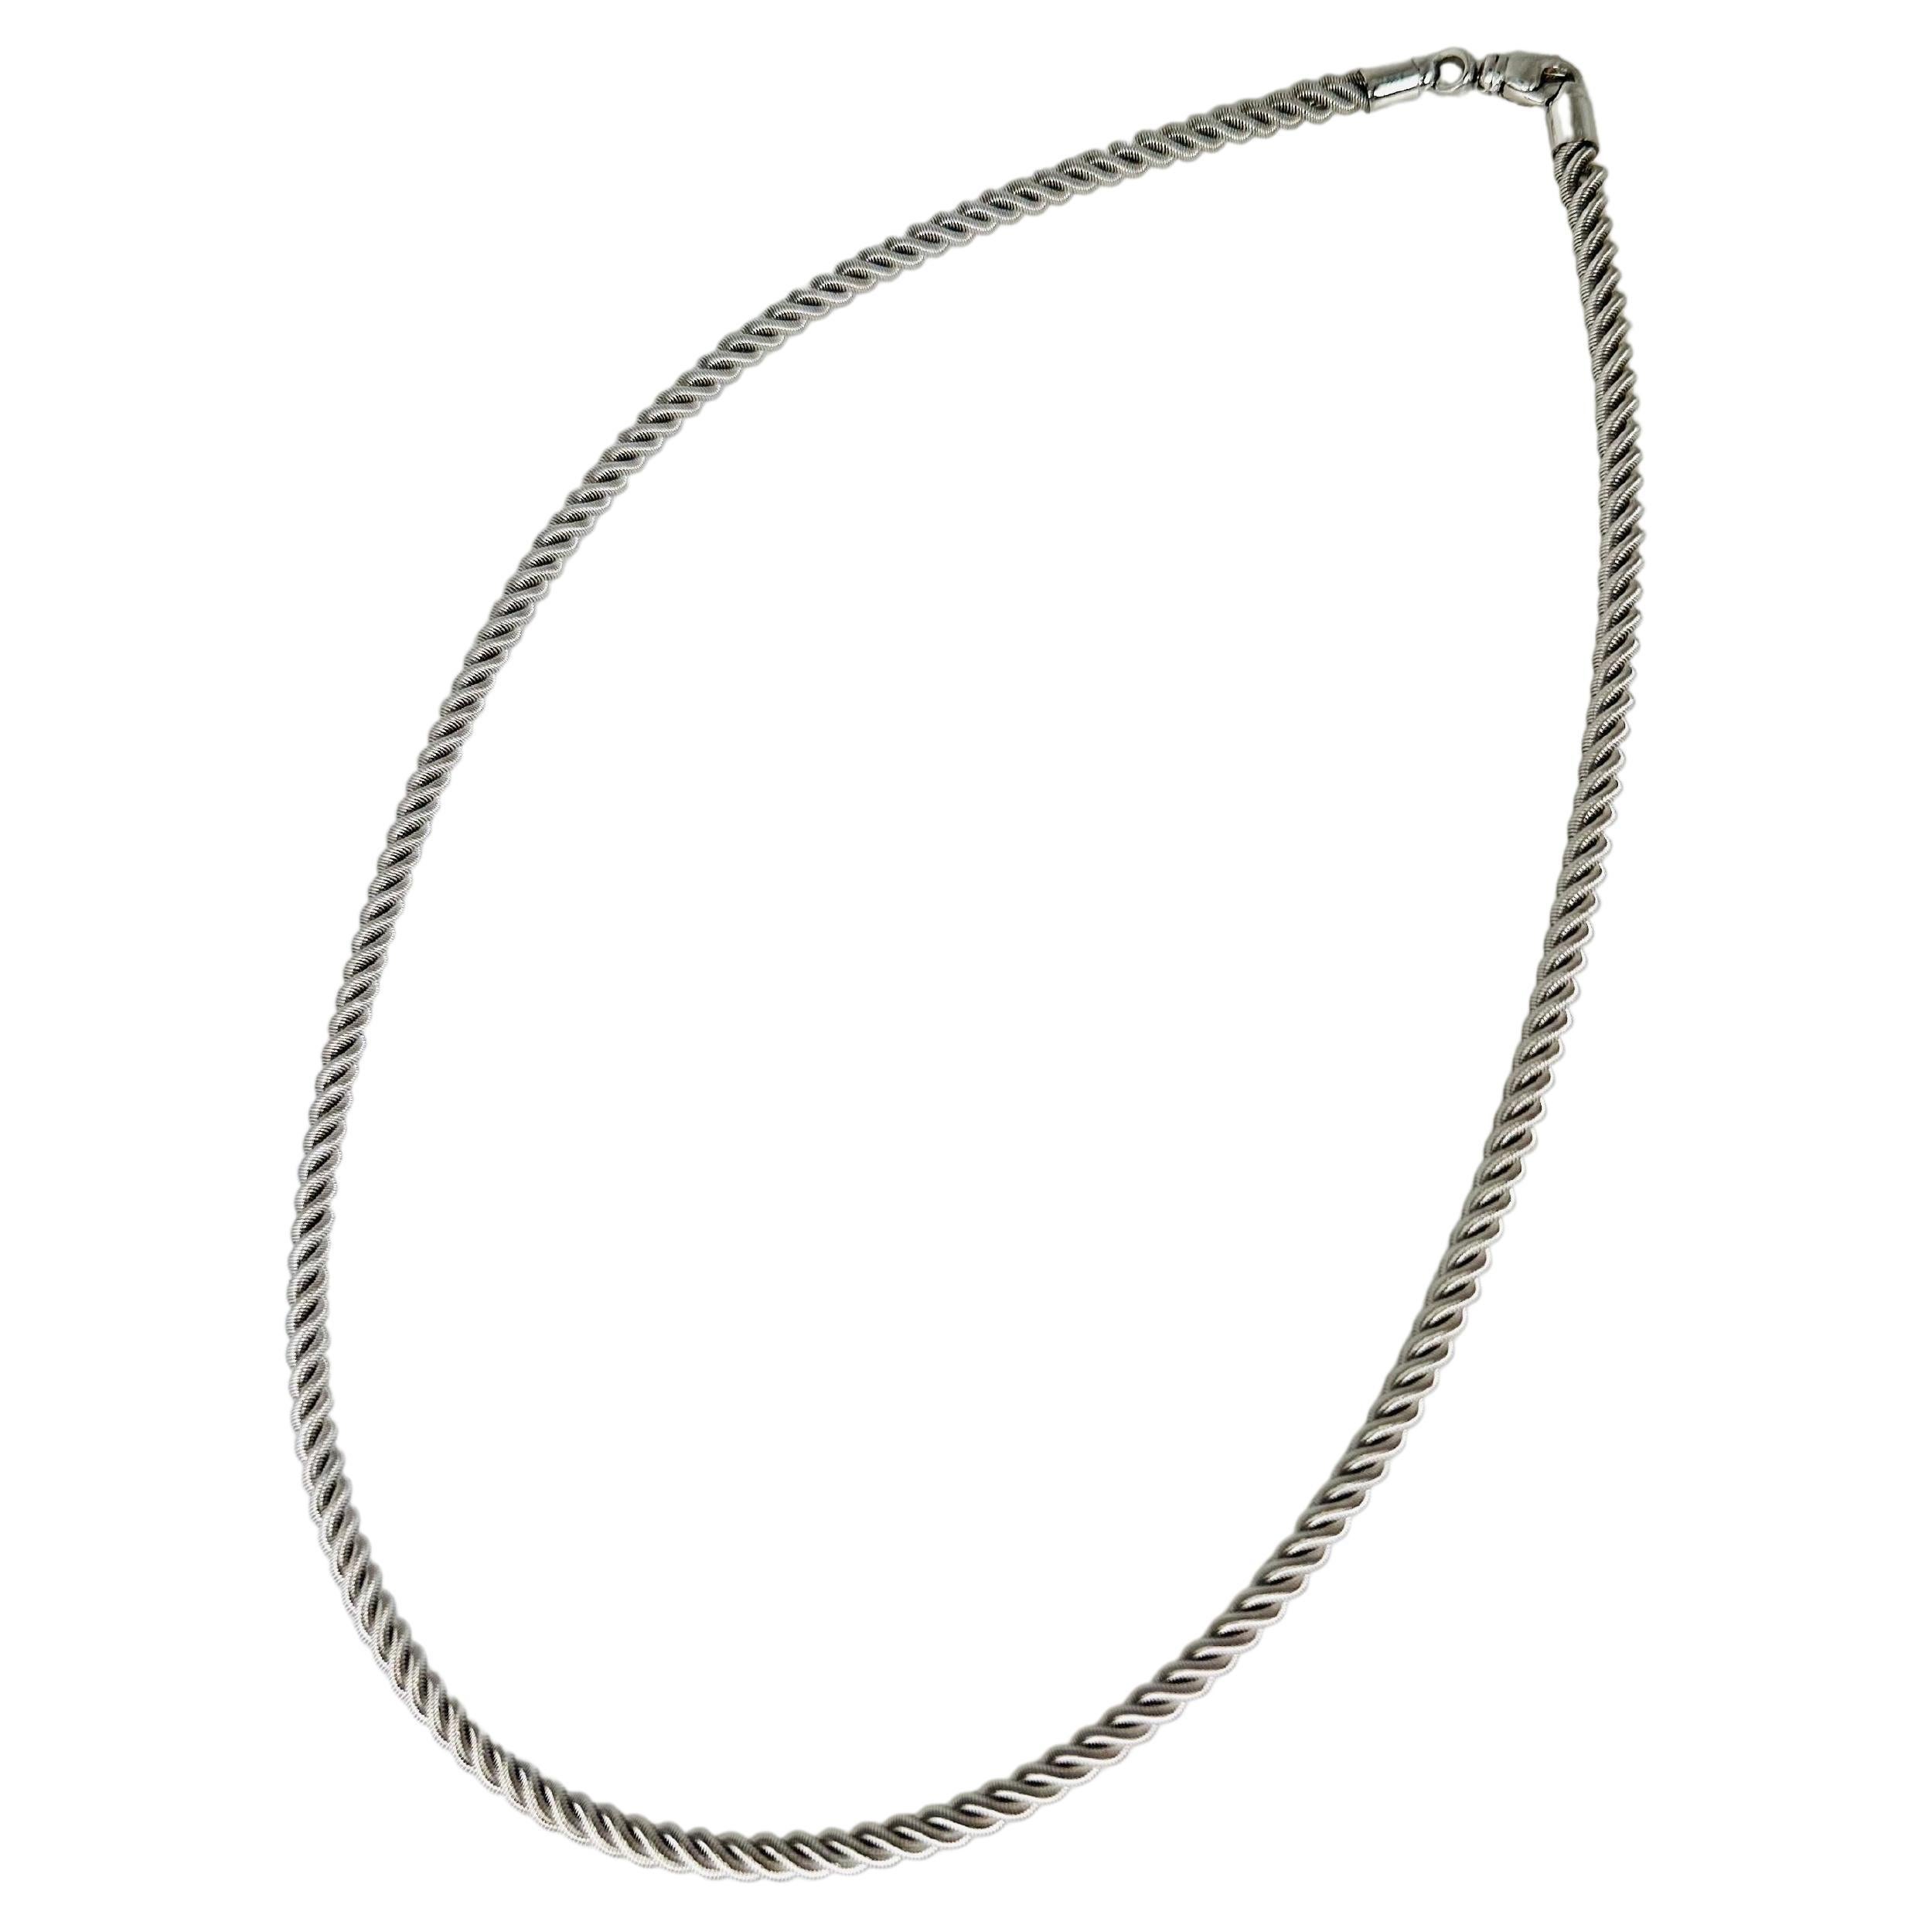 Exceptional 18KT white gold chain necklace 18 inches unique twisted fancy chain